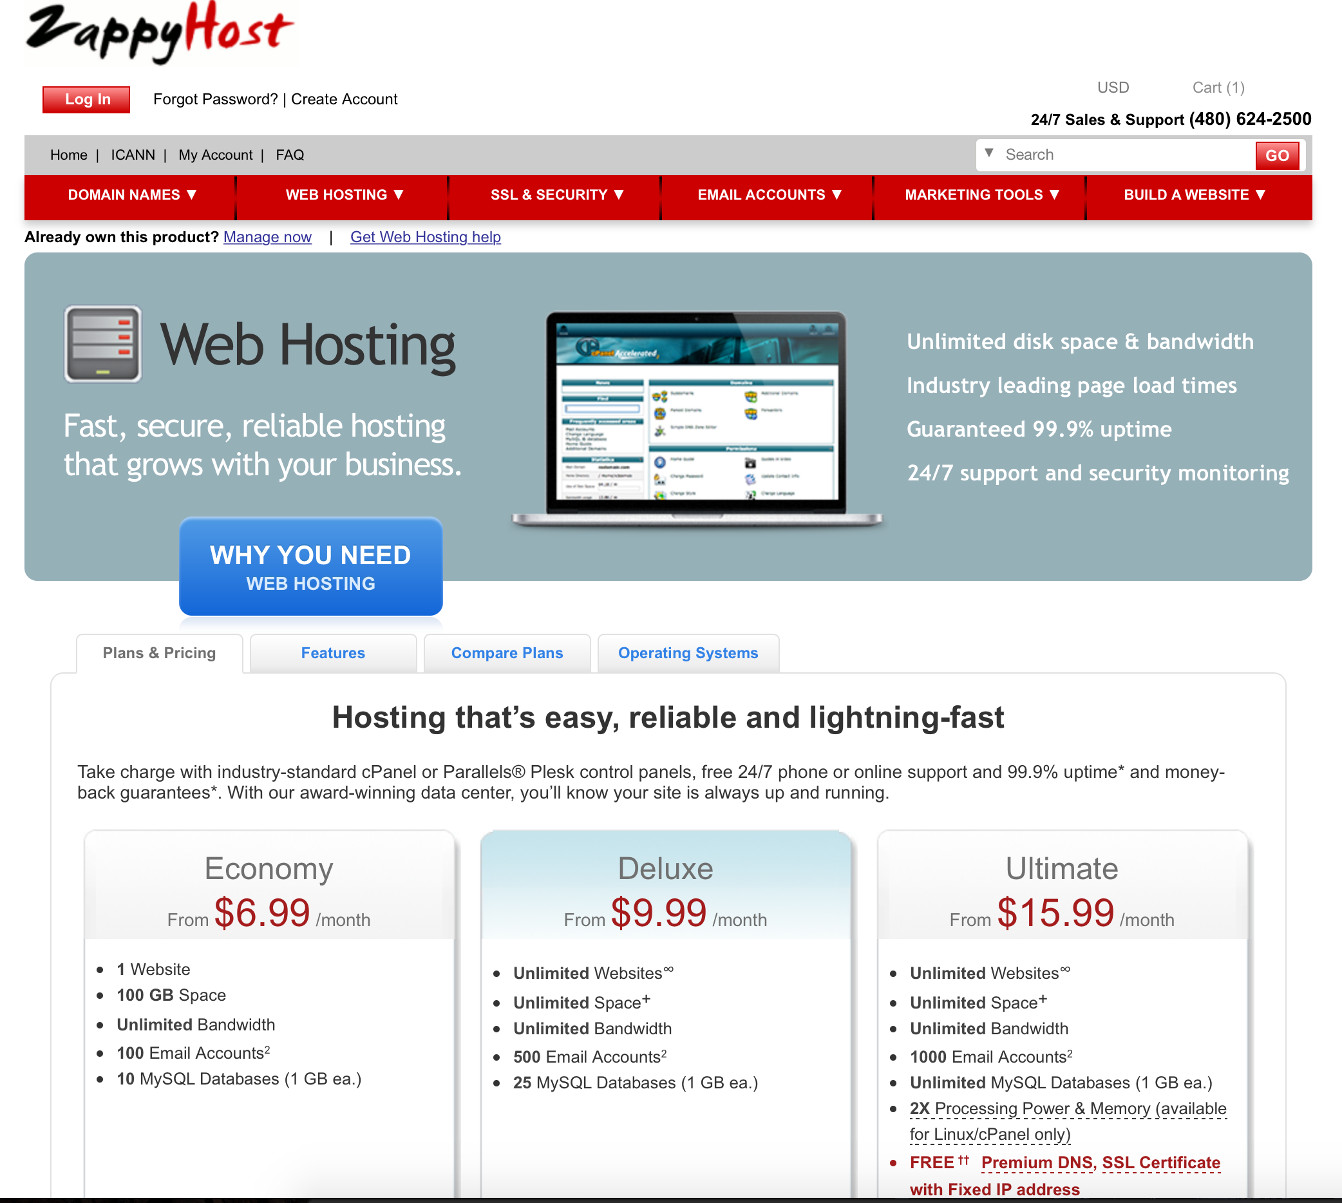 Screenshot of the ZappyHost hosting page